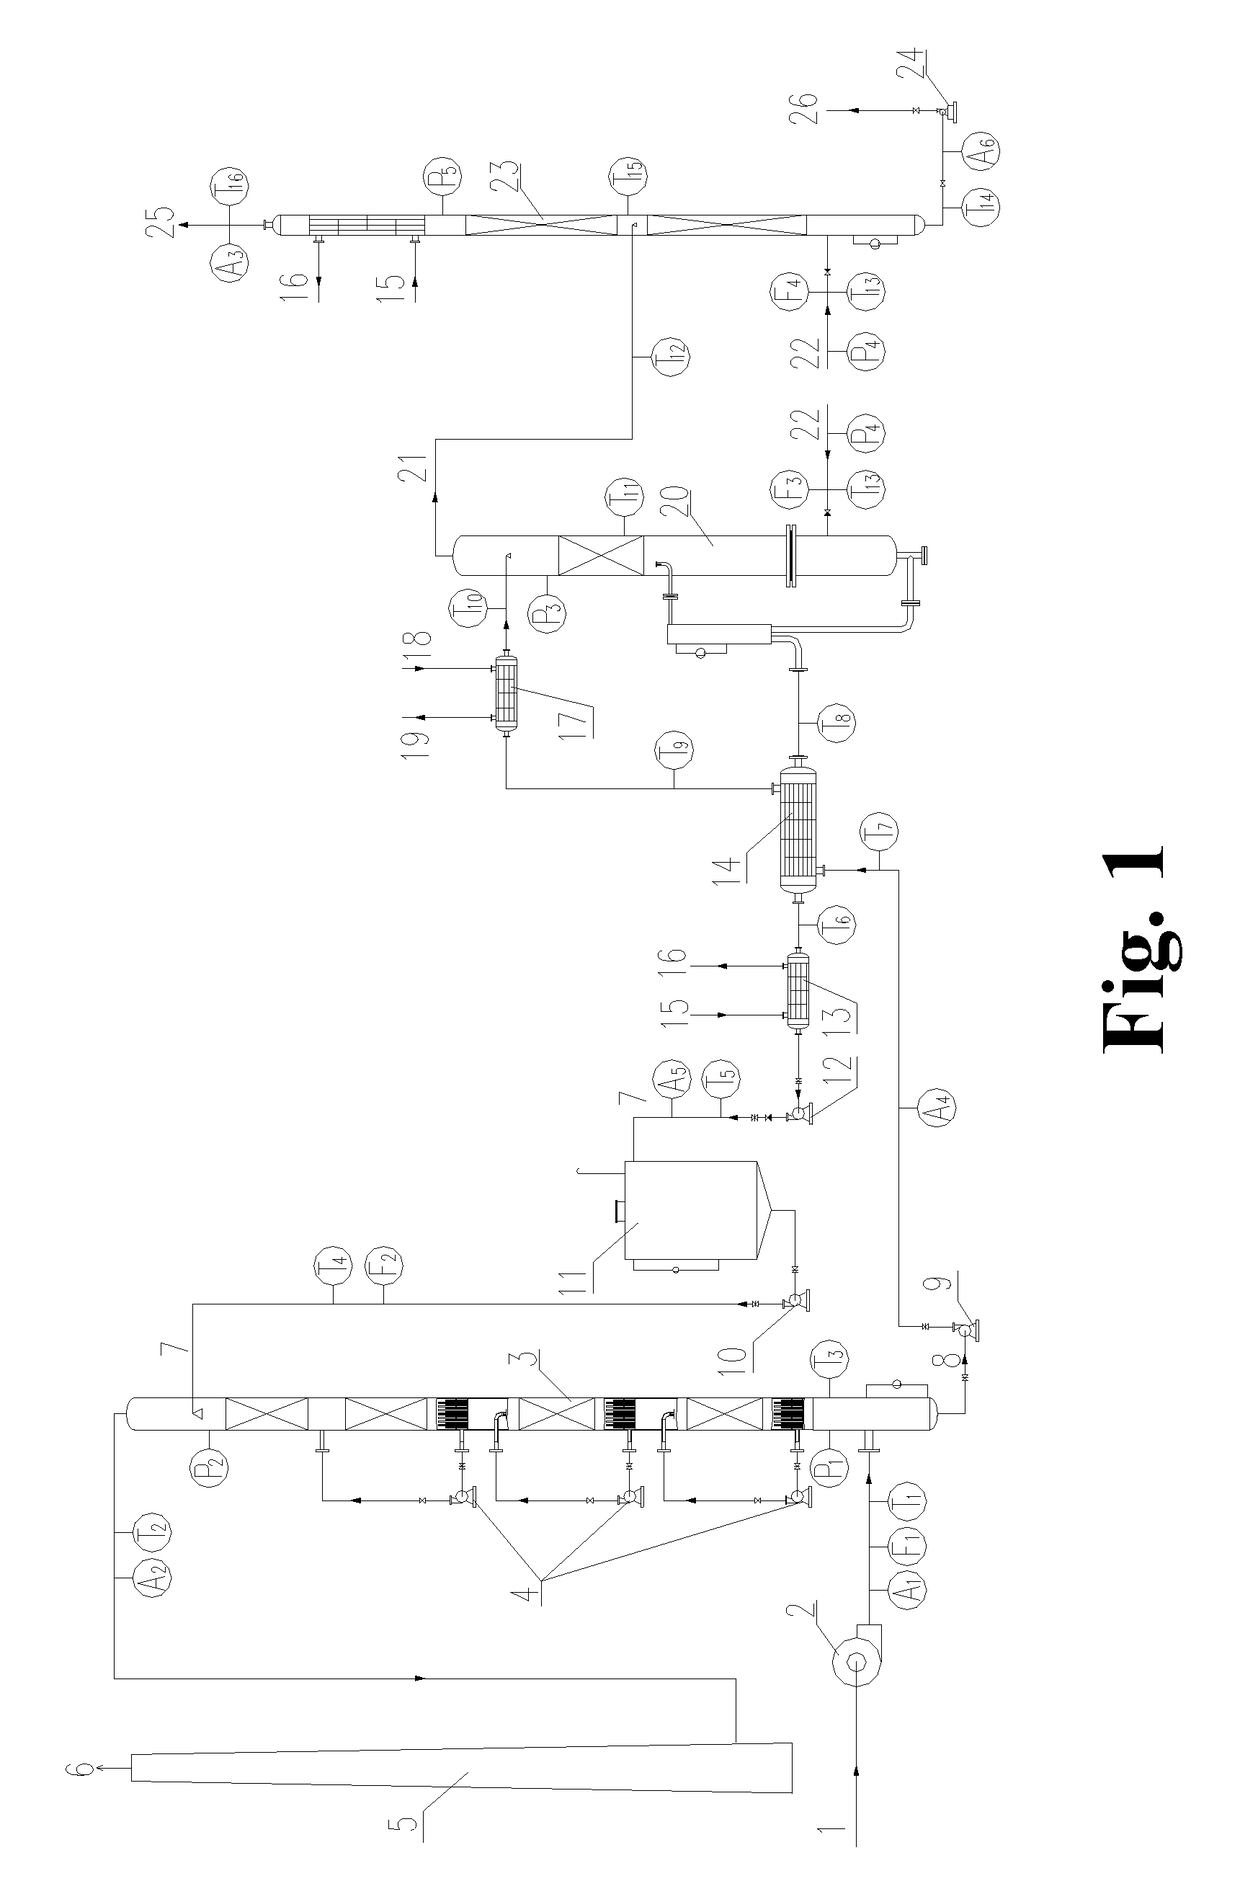 Process and device for desulphurization and denitration of flue gas